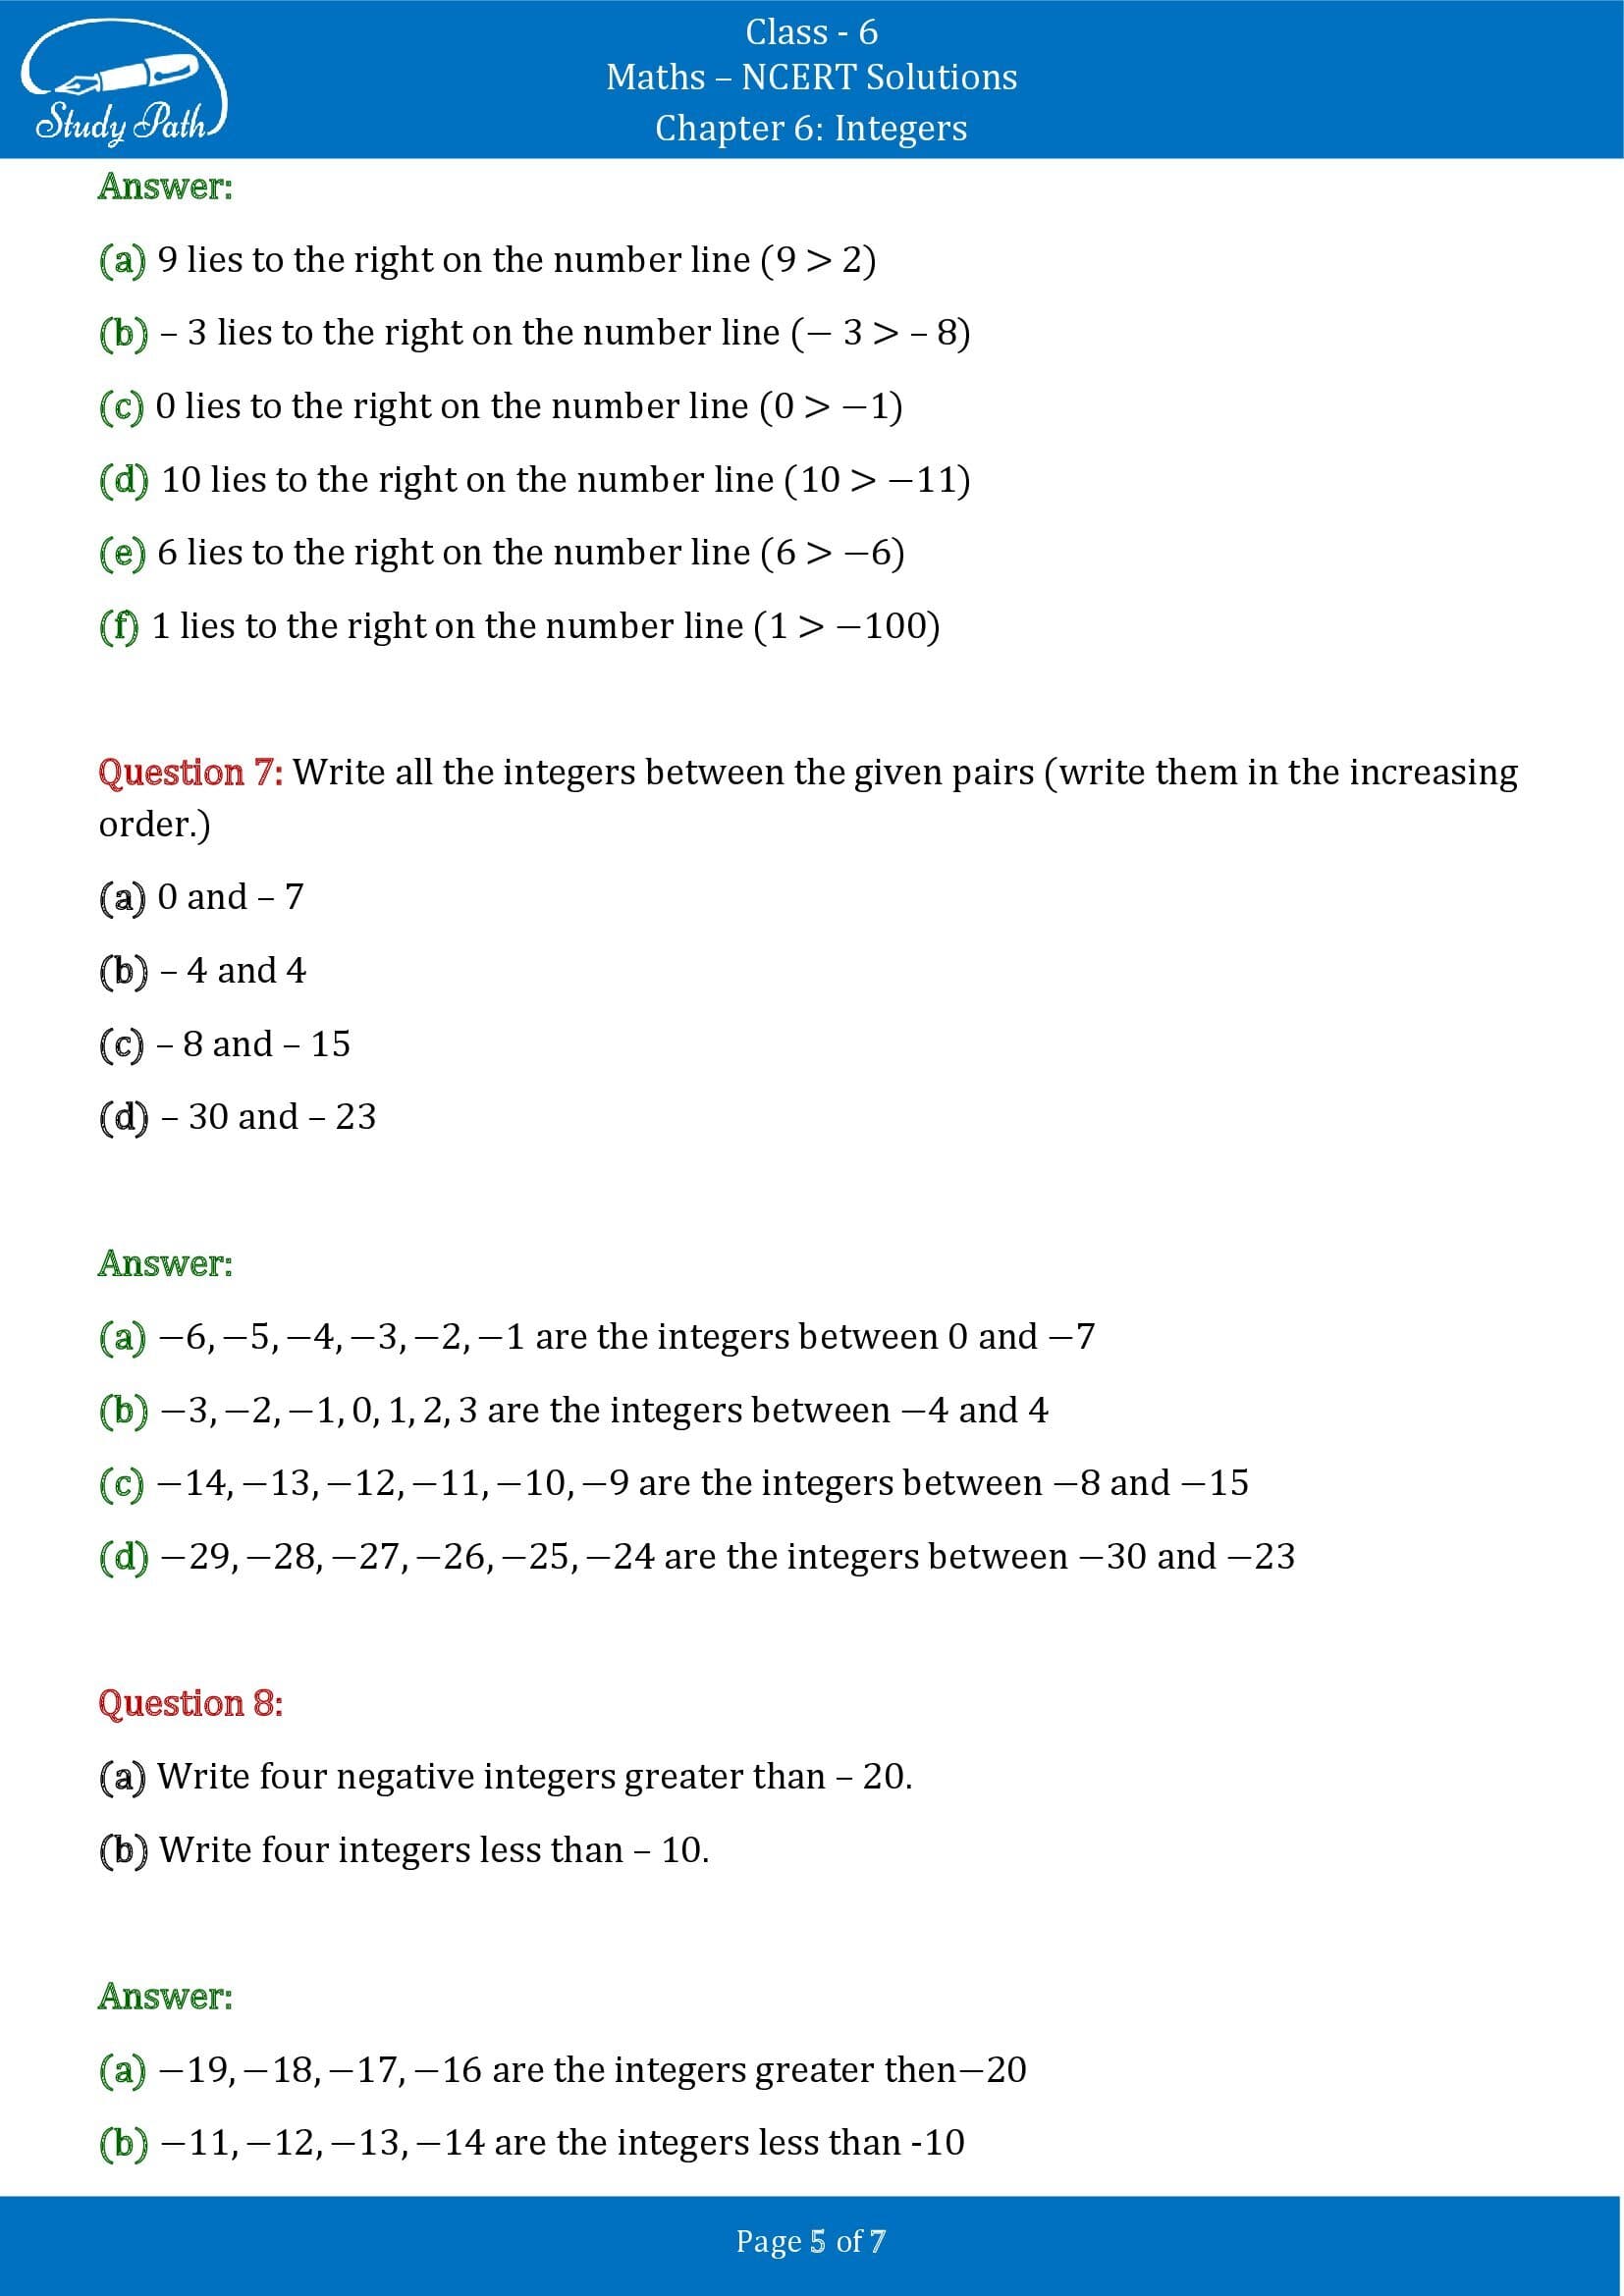 NCERT Solutions for Class 6 Maths Chapter 6 Integers Exercise 6.1 00005